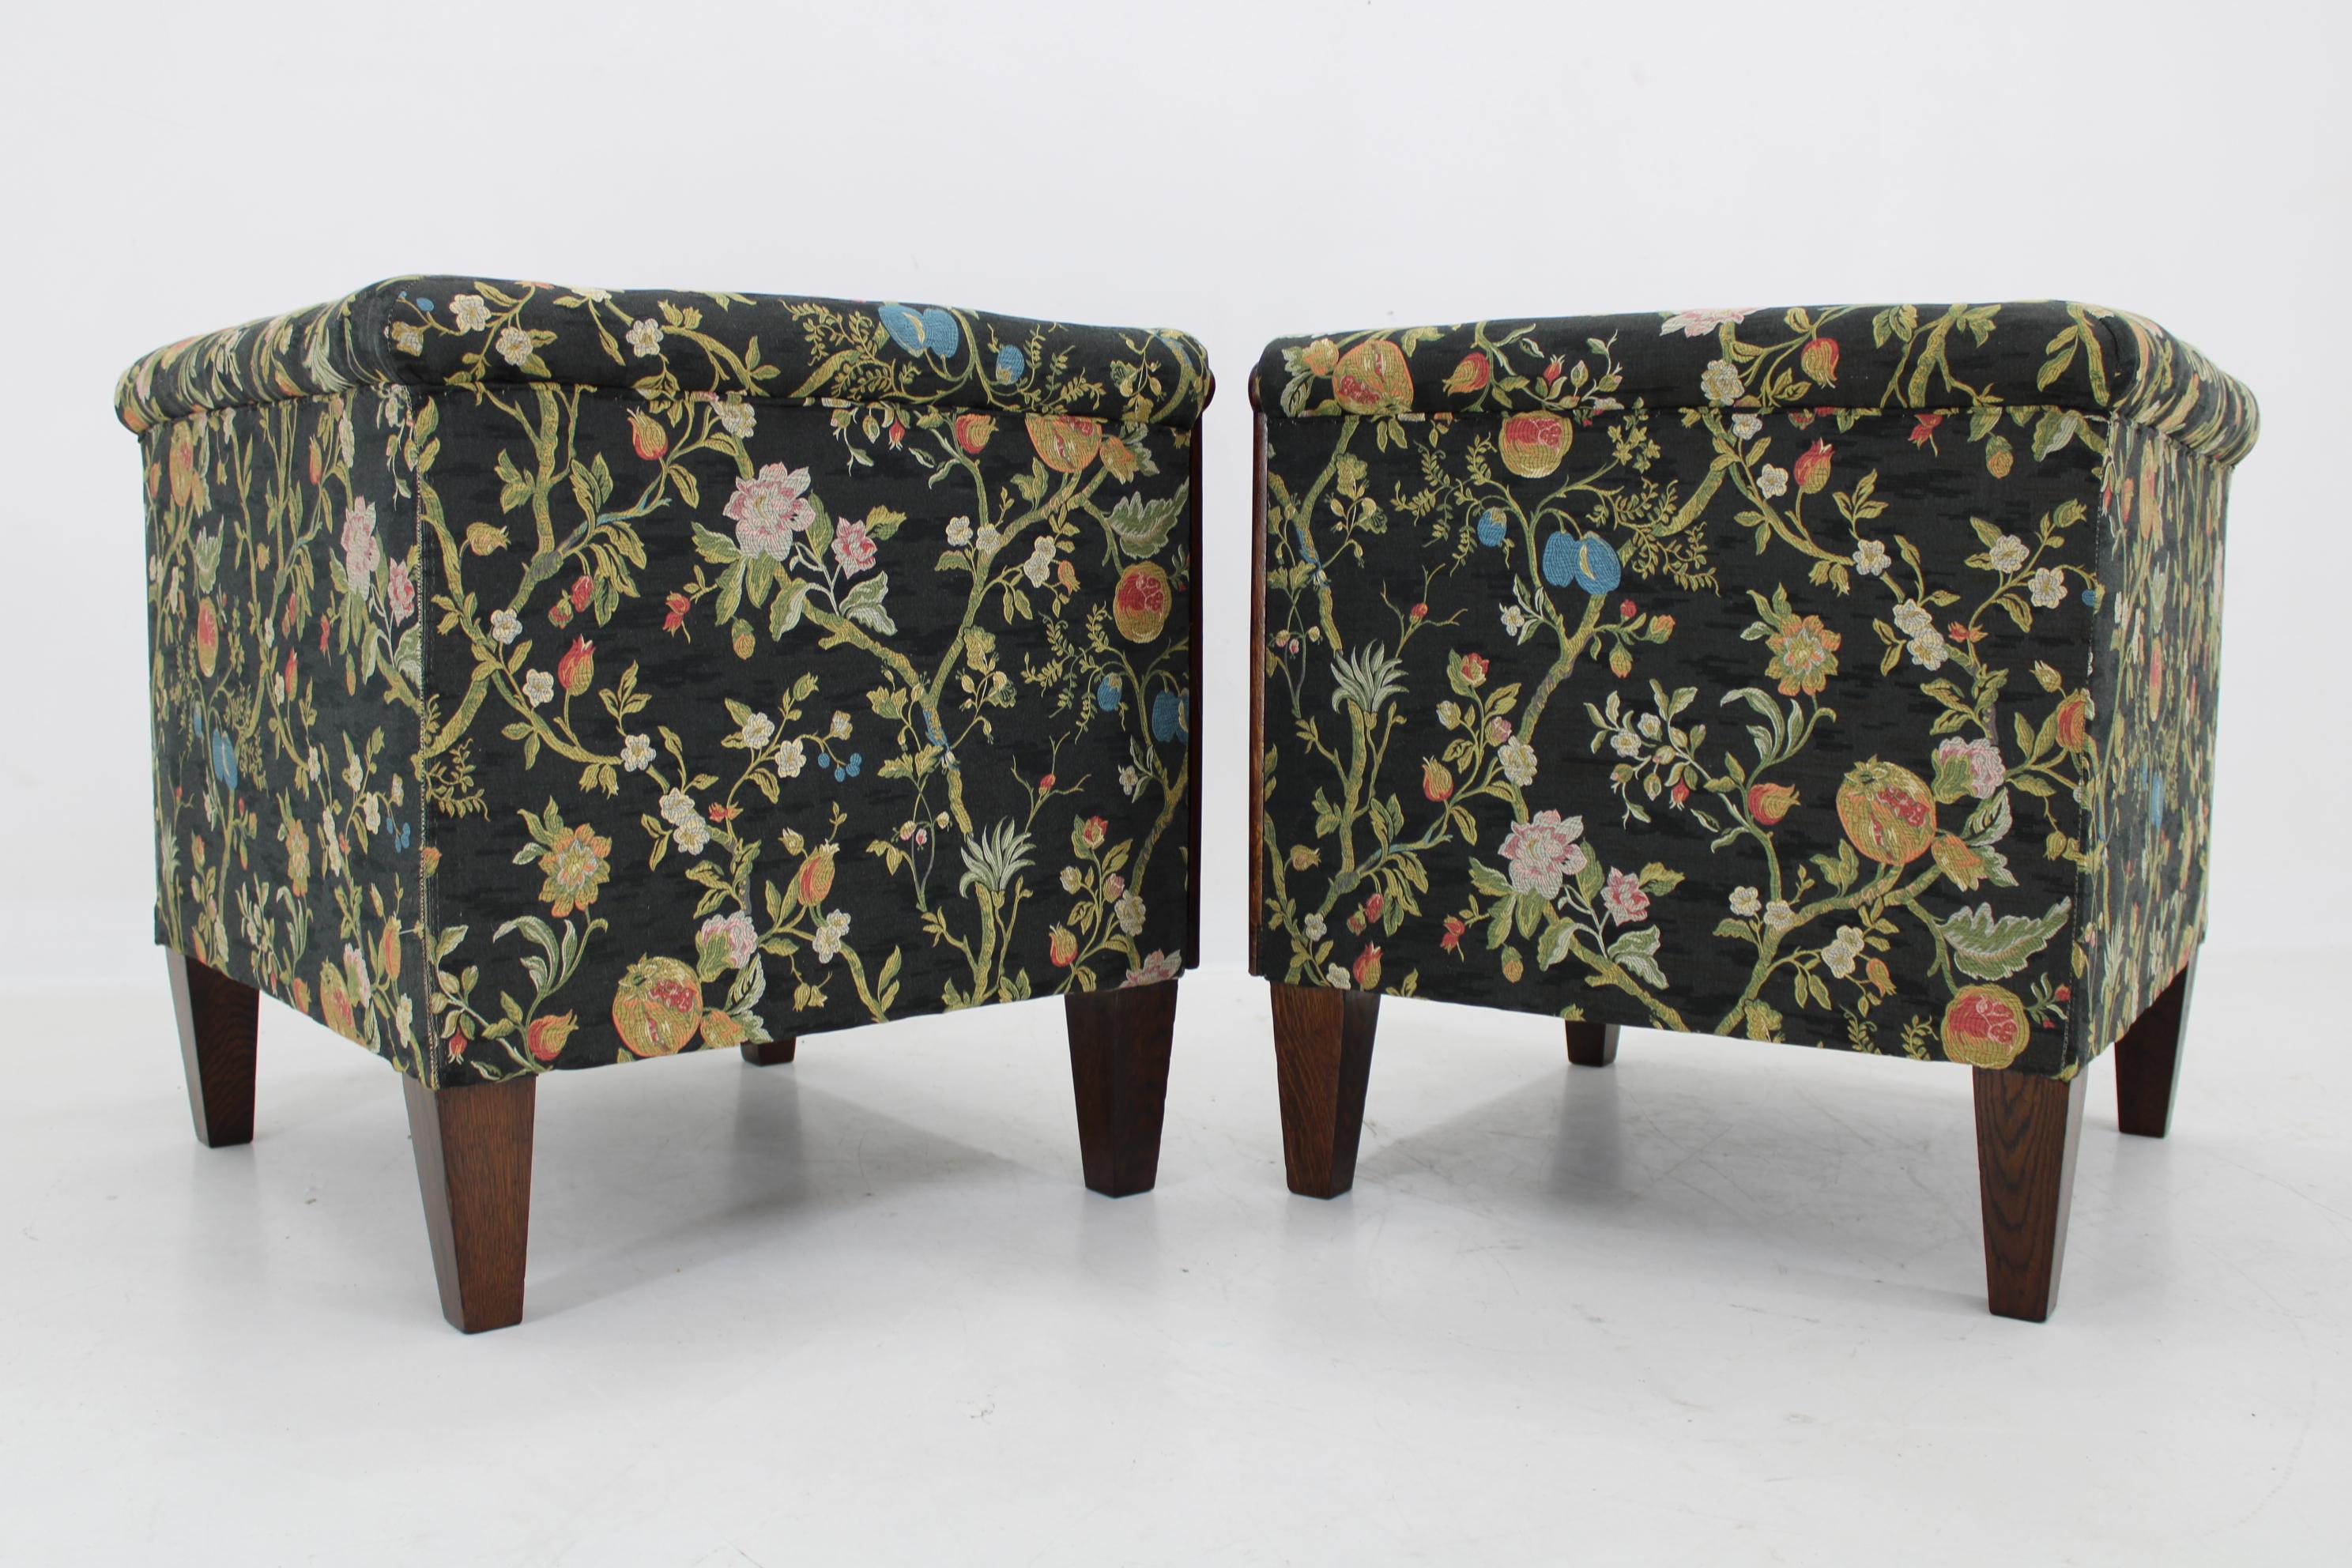 1930s Restored Pair of Art Deco Armchairs , Czechoslovakia For Sale 4